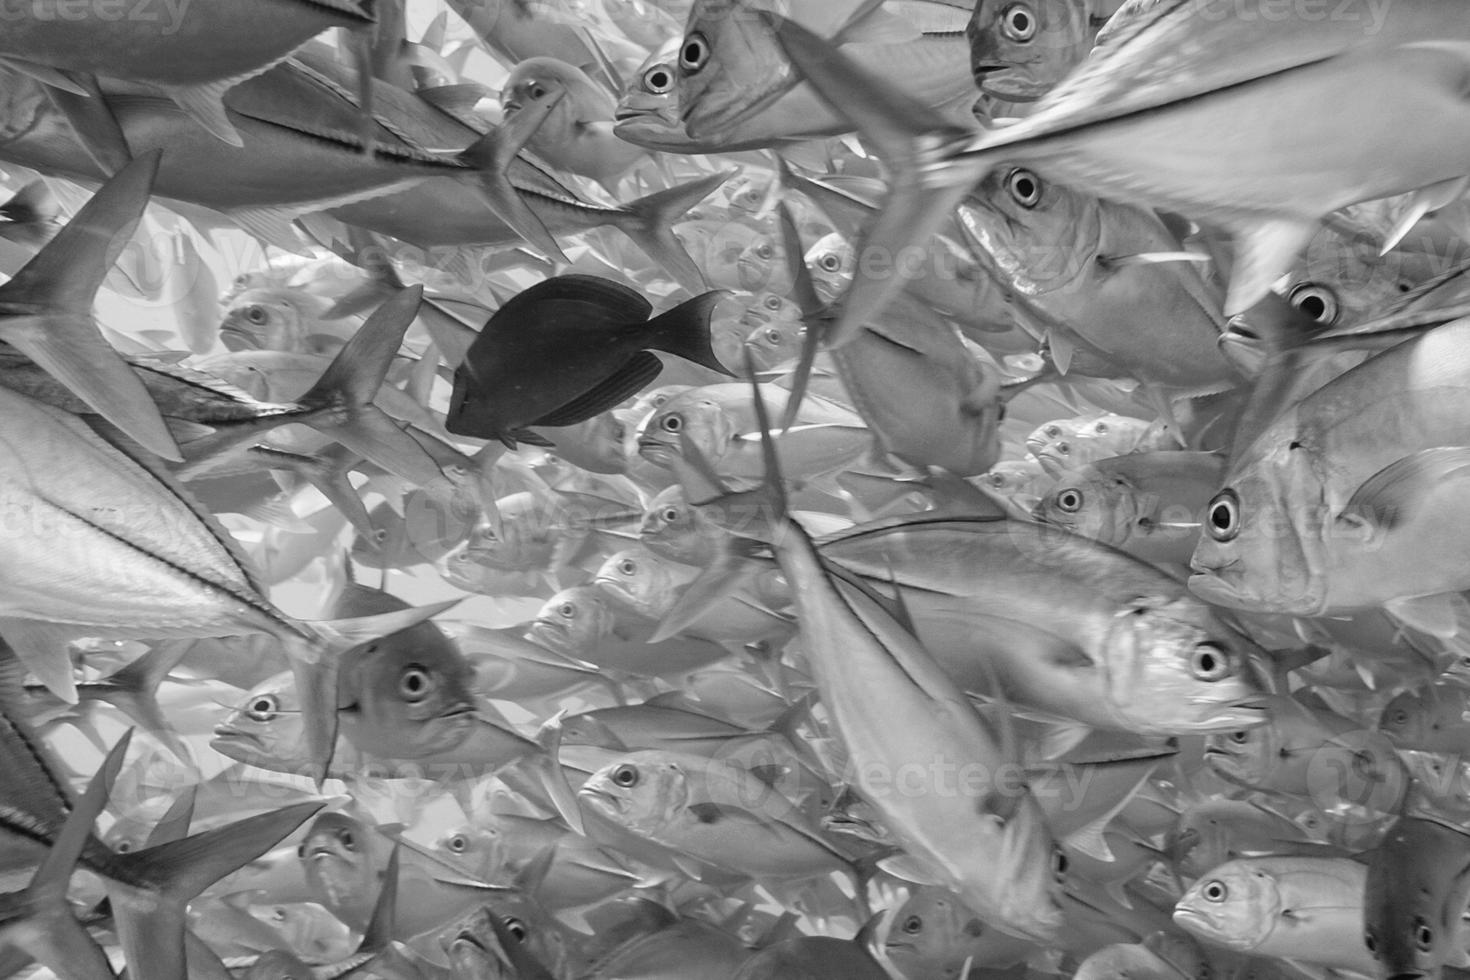 Inside a school of fish underwater in black and white photo